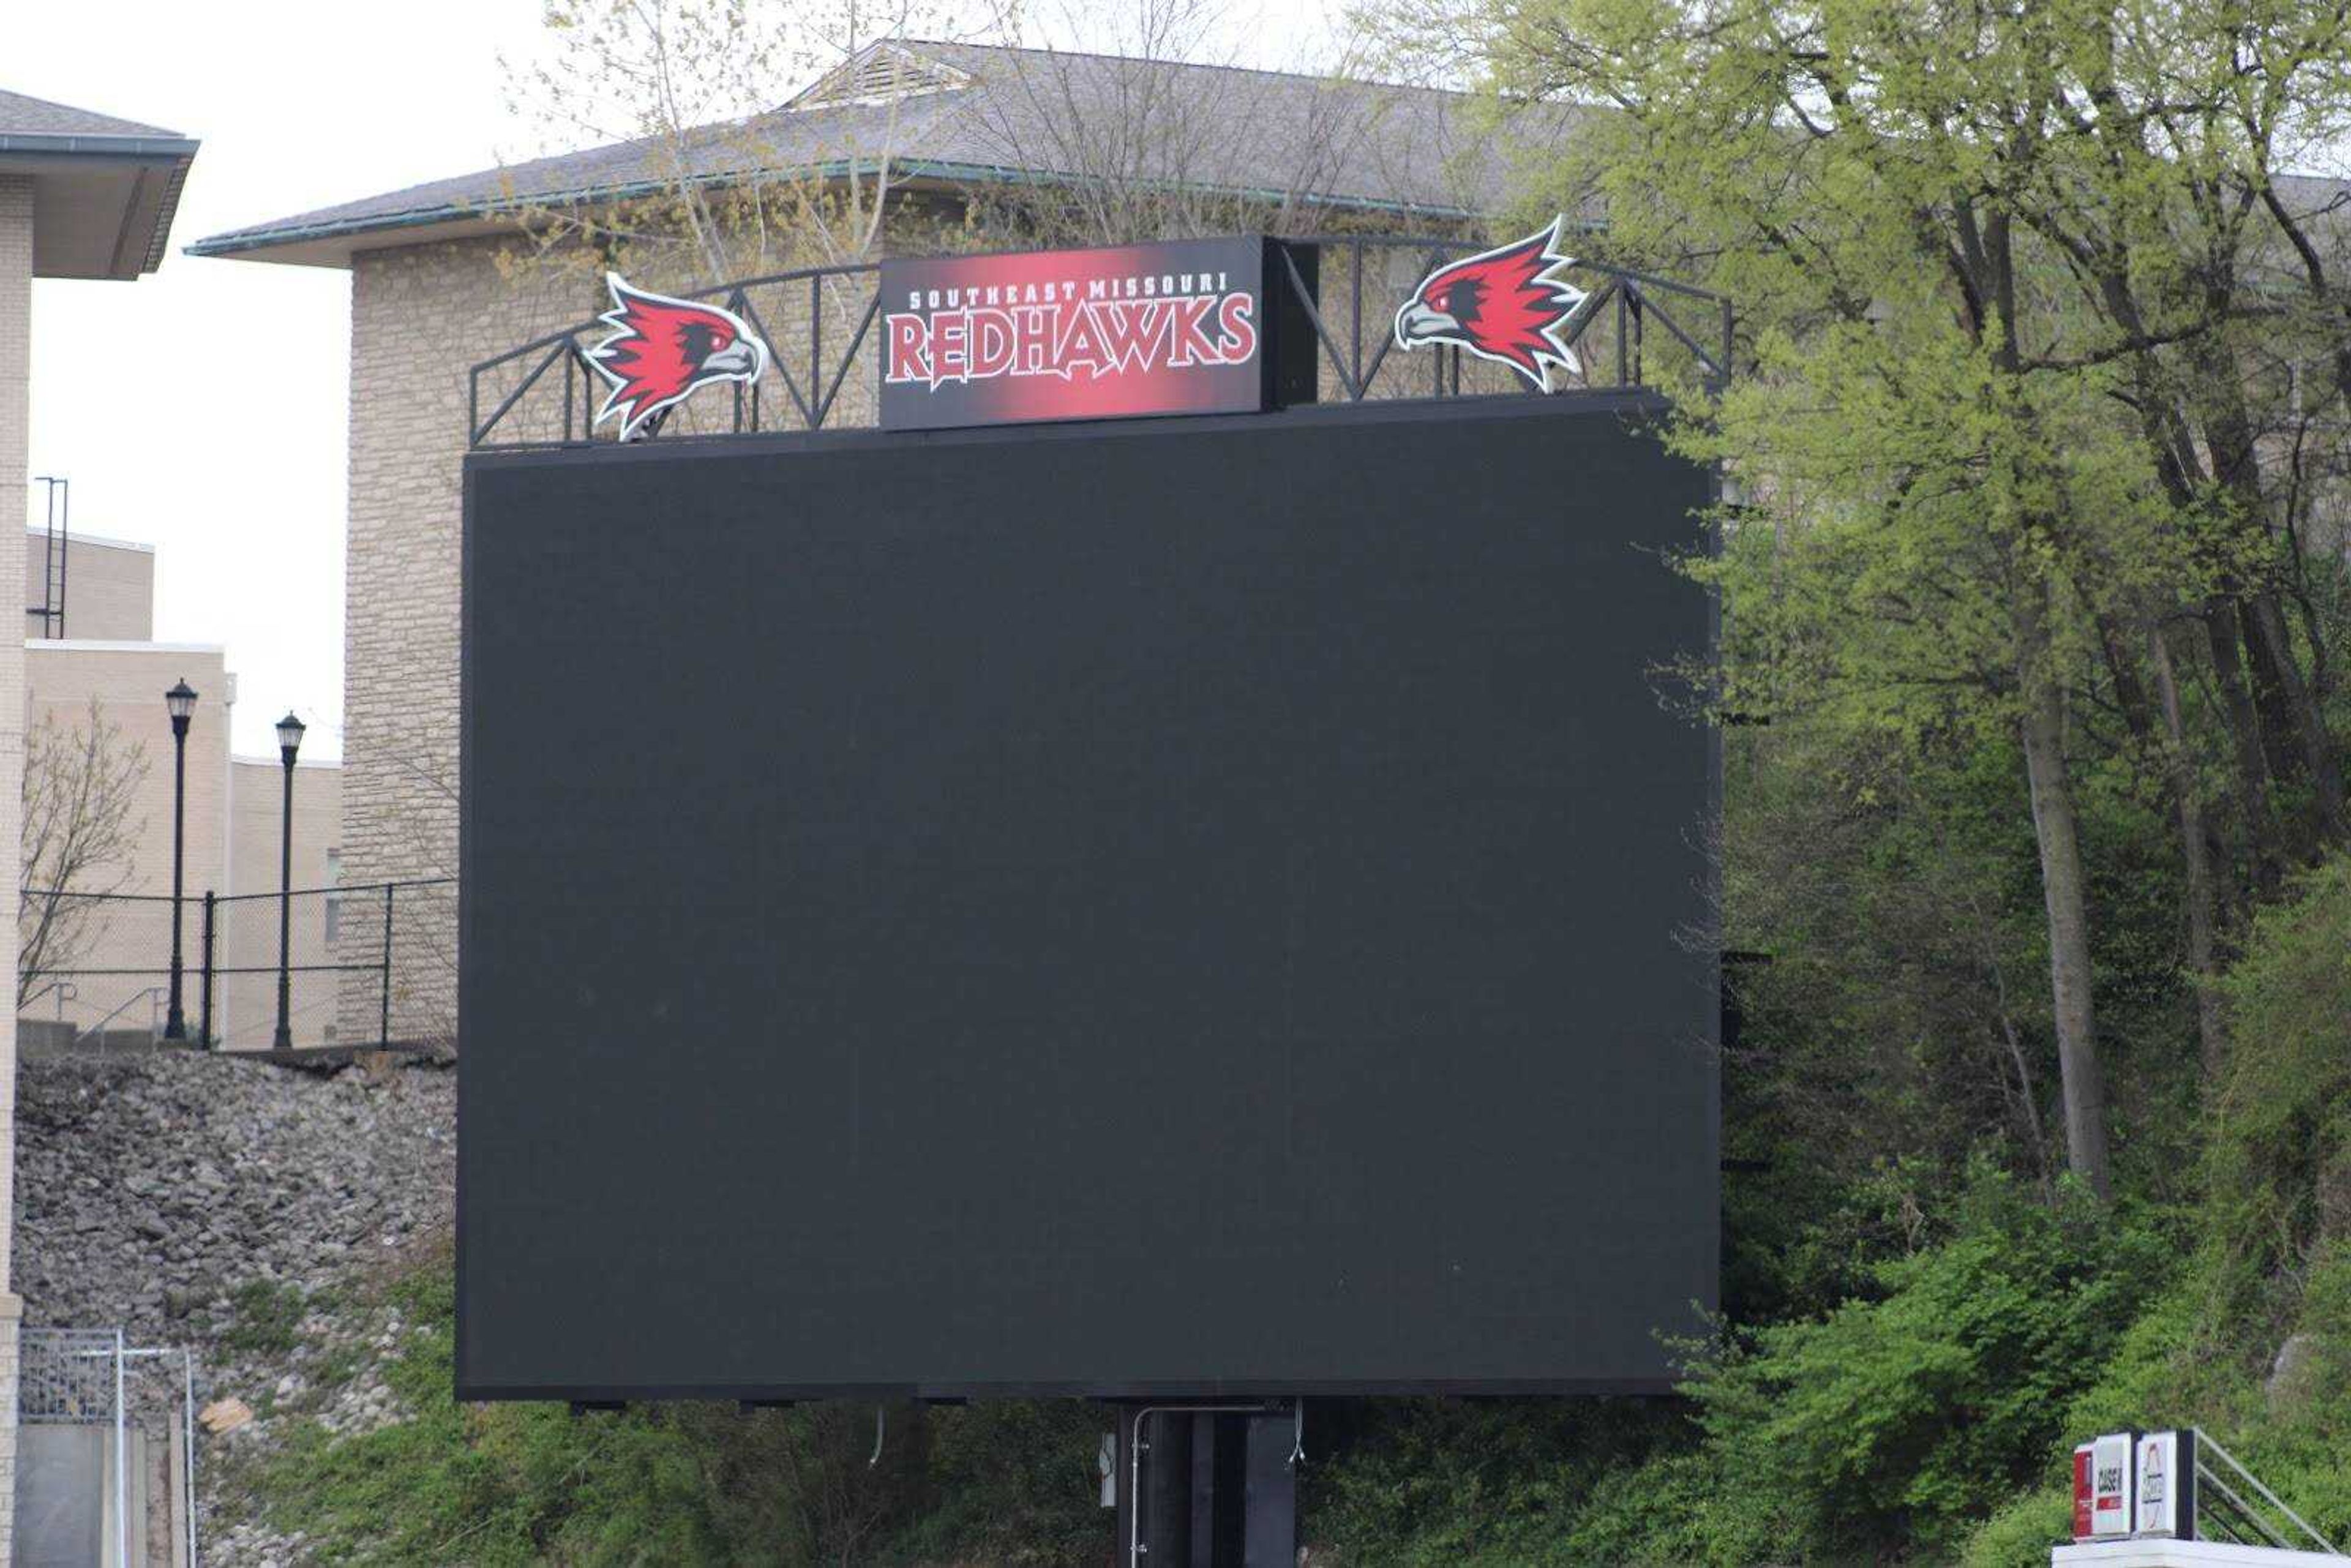 Southeast’s new video board at Houck Field was completed in early April, and cost an estimated $710,000.